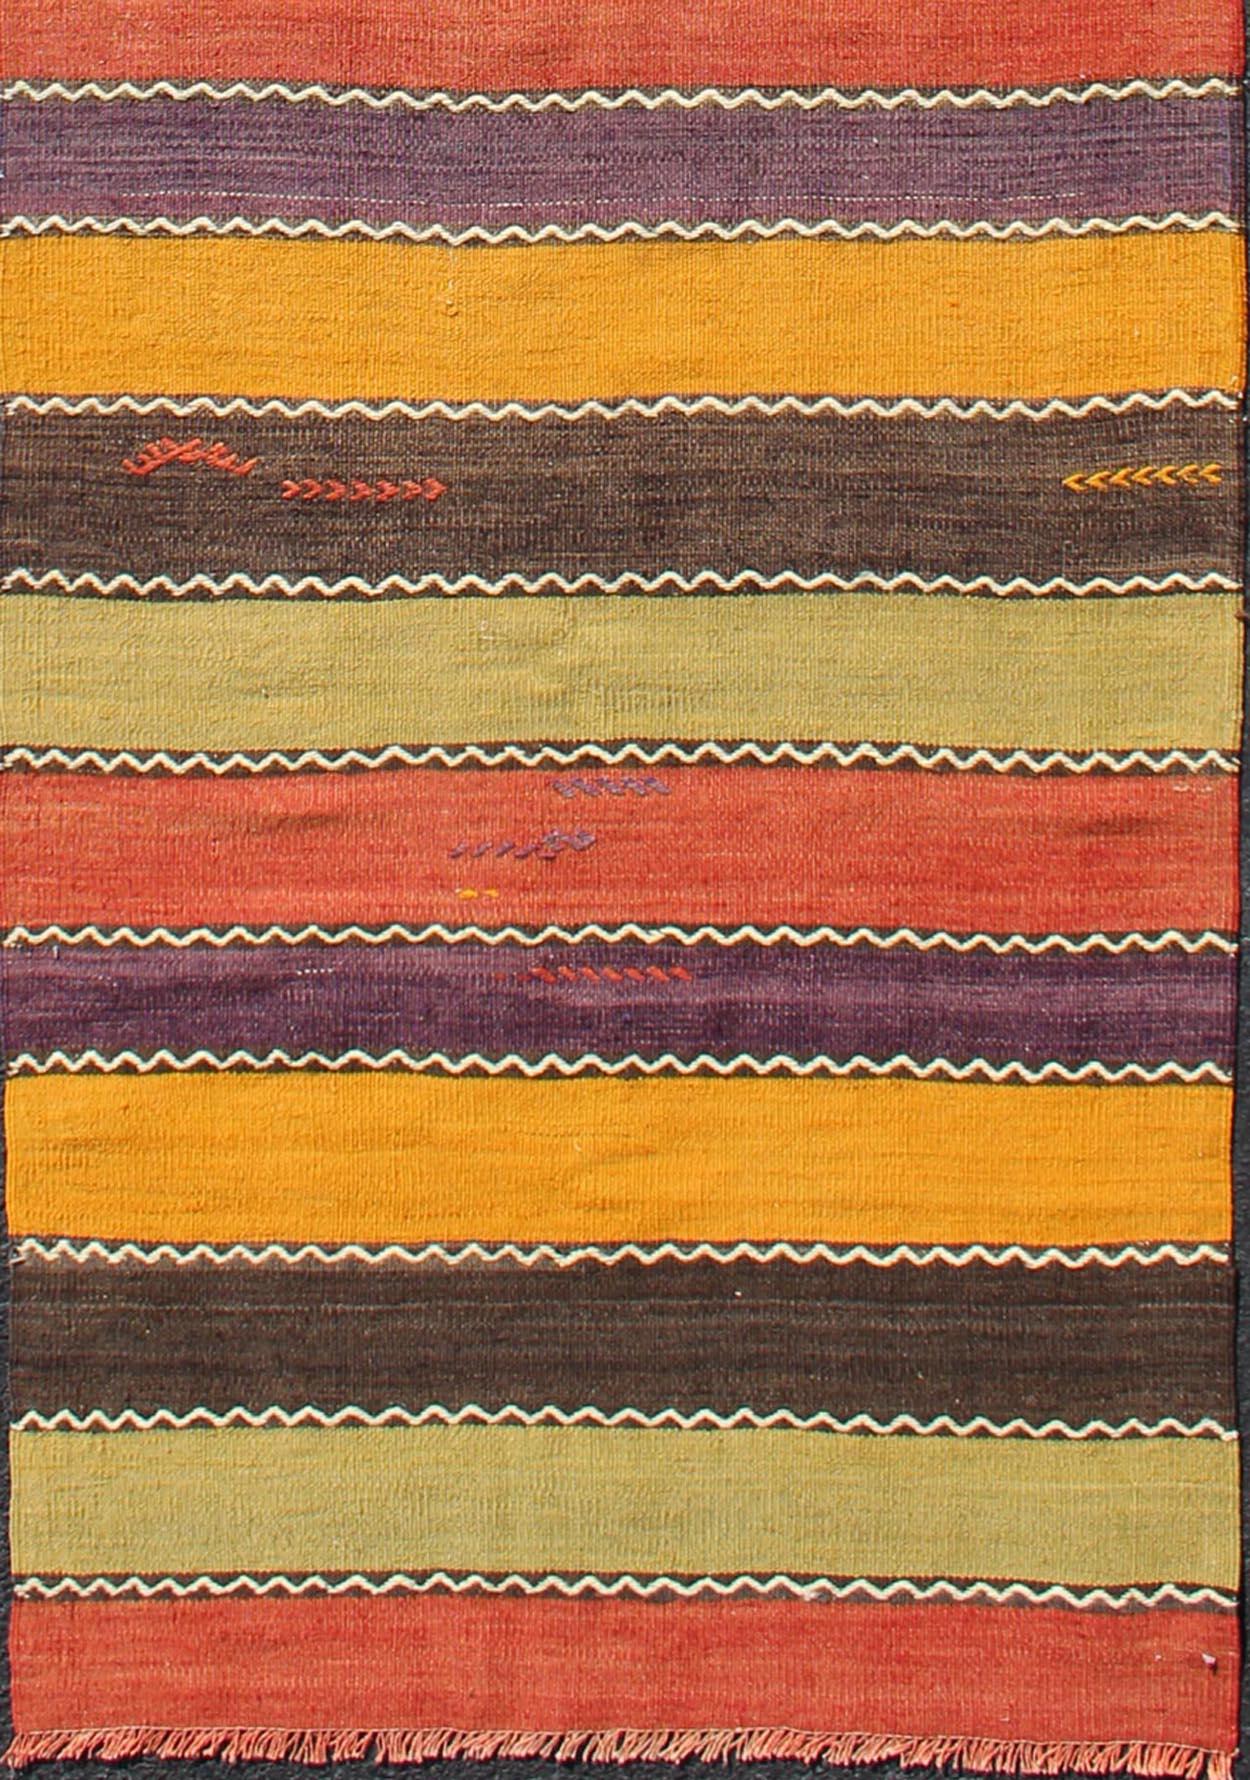 Vintage Kilim runner with horizontal stripes in orange, green, purple, red, gold, rug TU-NED-634, country of origin / type: Turkey / Kilim, circa mid-20th century

Featuring a repeating horizontal stripe design, this unique mid-century Kilim